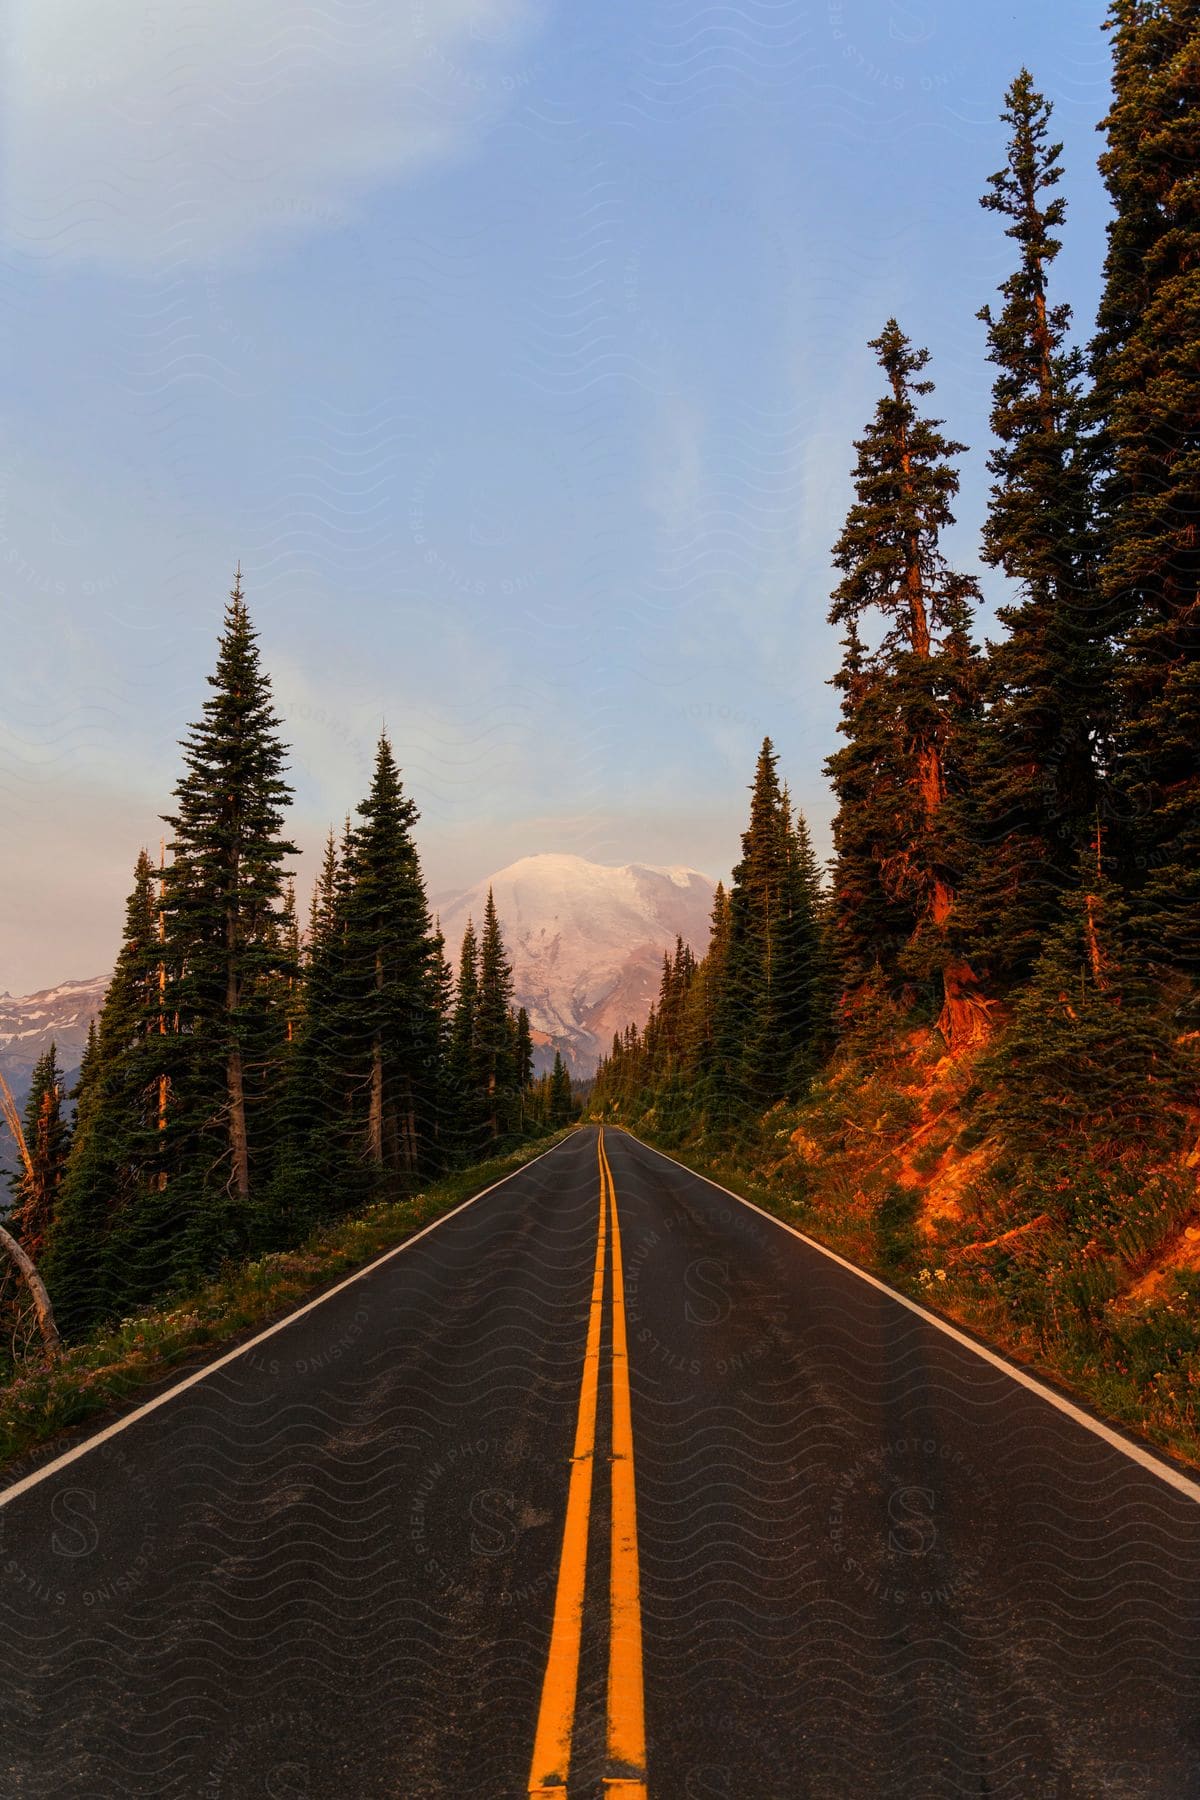 An empty road stretches directly towards a majestic mountain, flanked by tall trees under a softly lit sky.